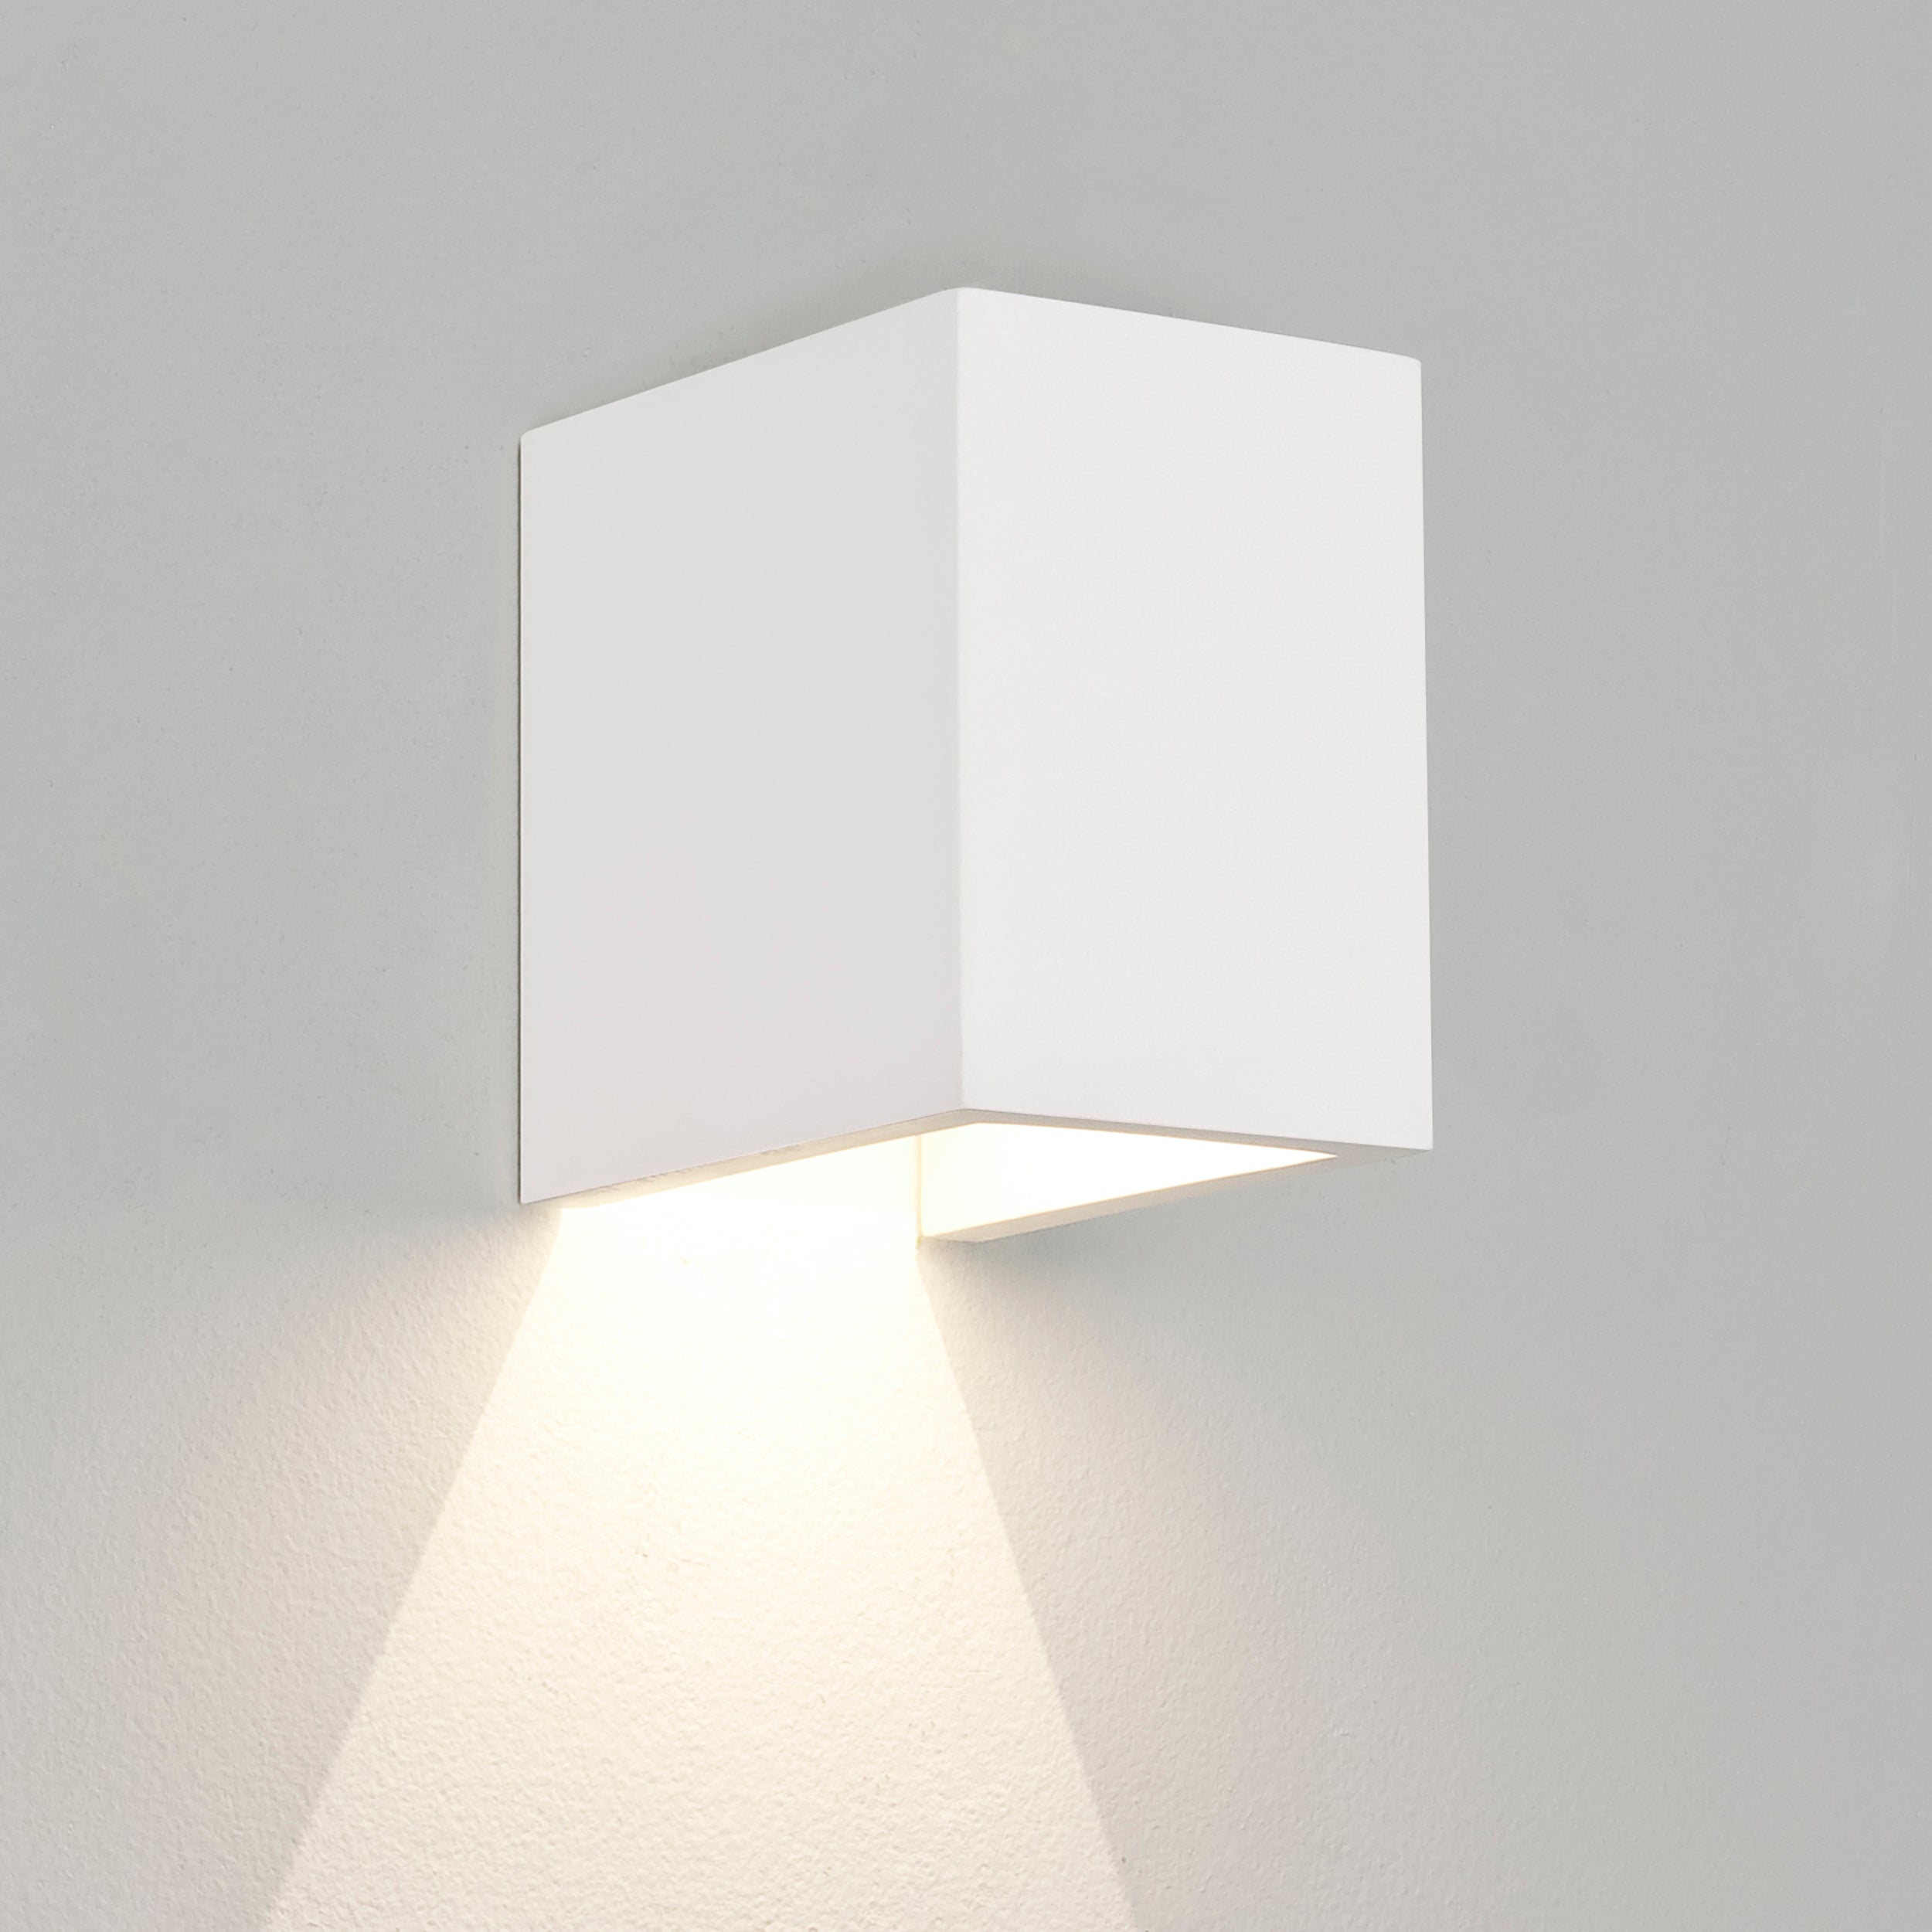 Astro Lighting Parma Wall Light Fixtures Astro Lighting 3.94x2.76x3.94 Plaster Yes (Integral), High Power LED